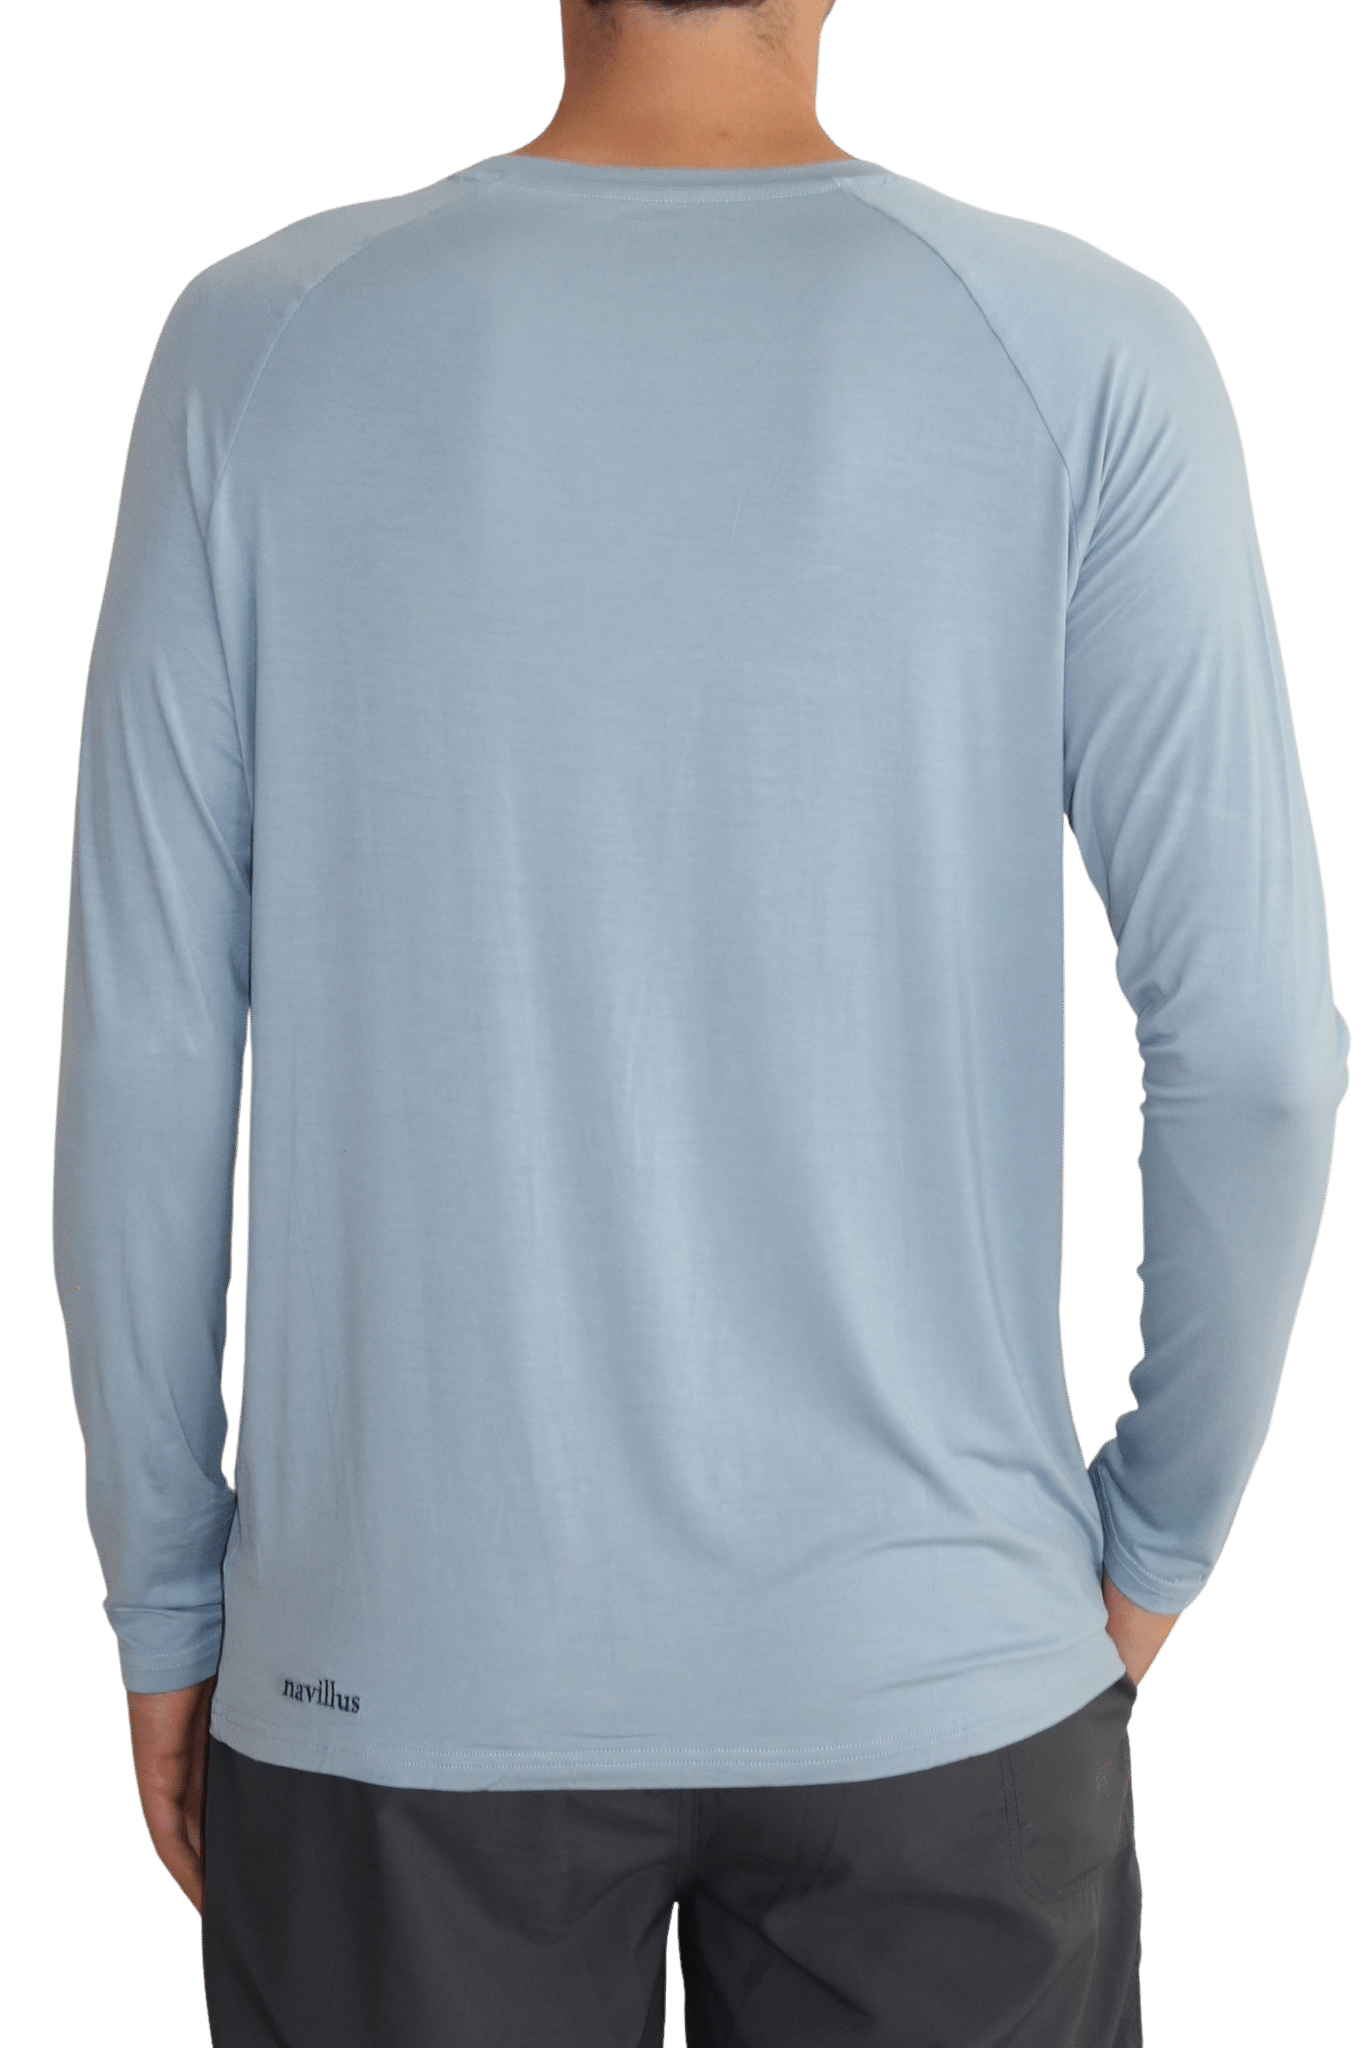 Back of the light ocean blue Icon long sleeve bamboo shirt.